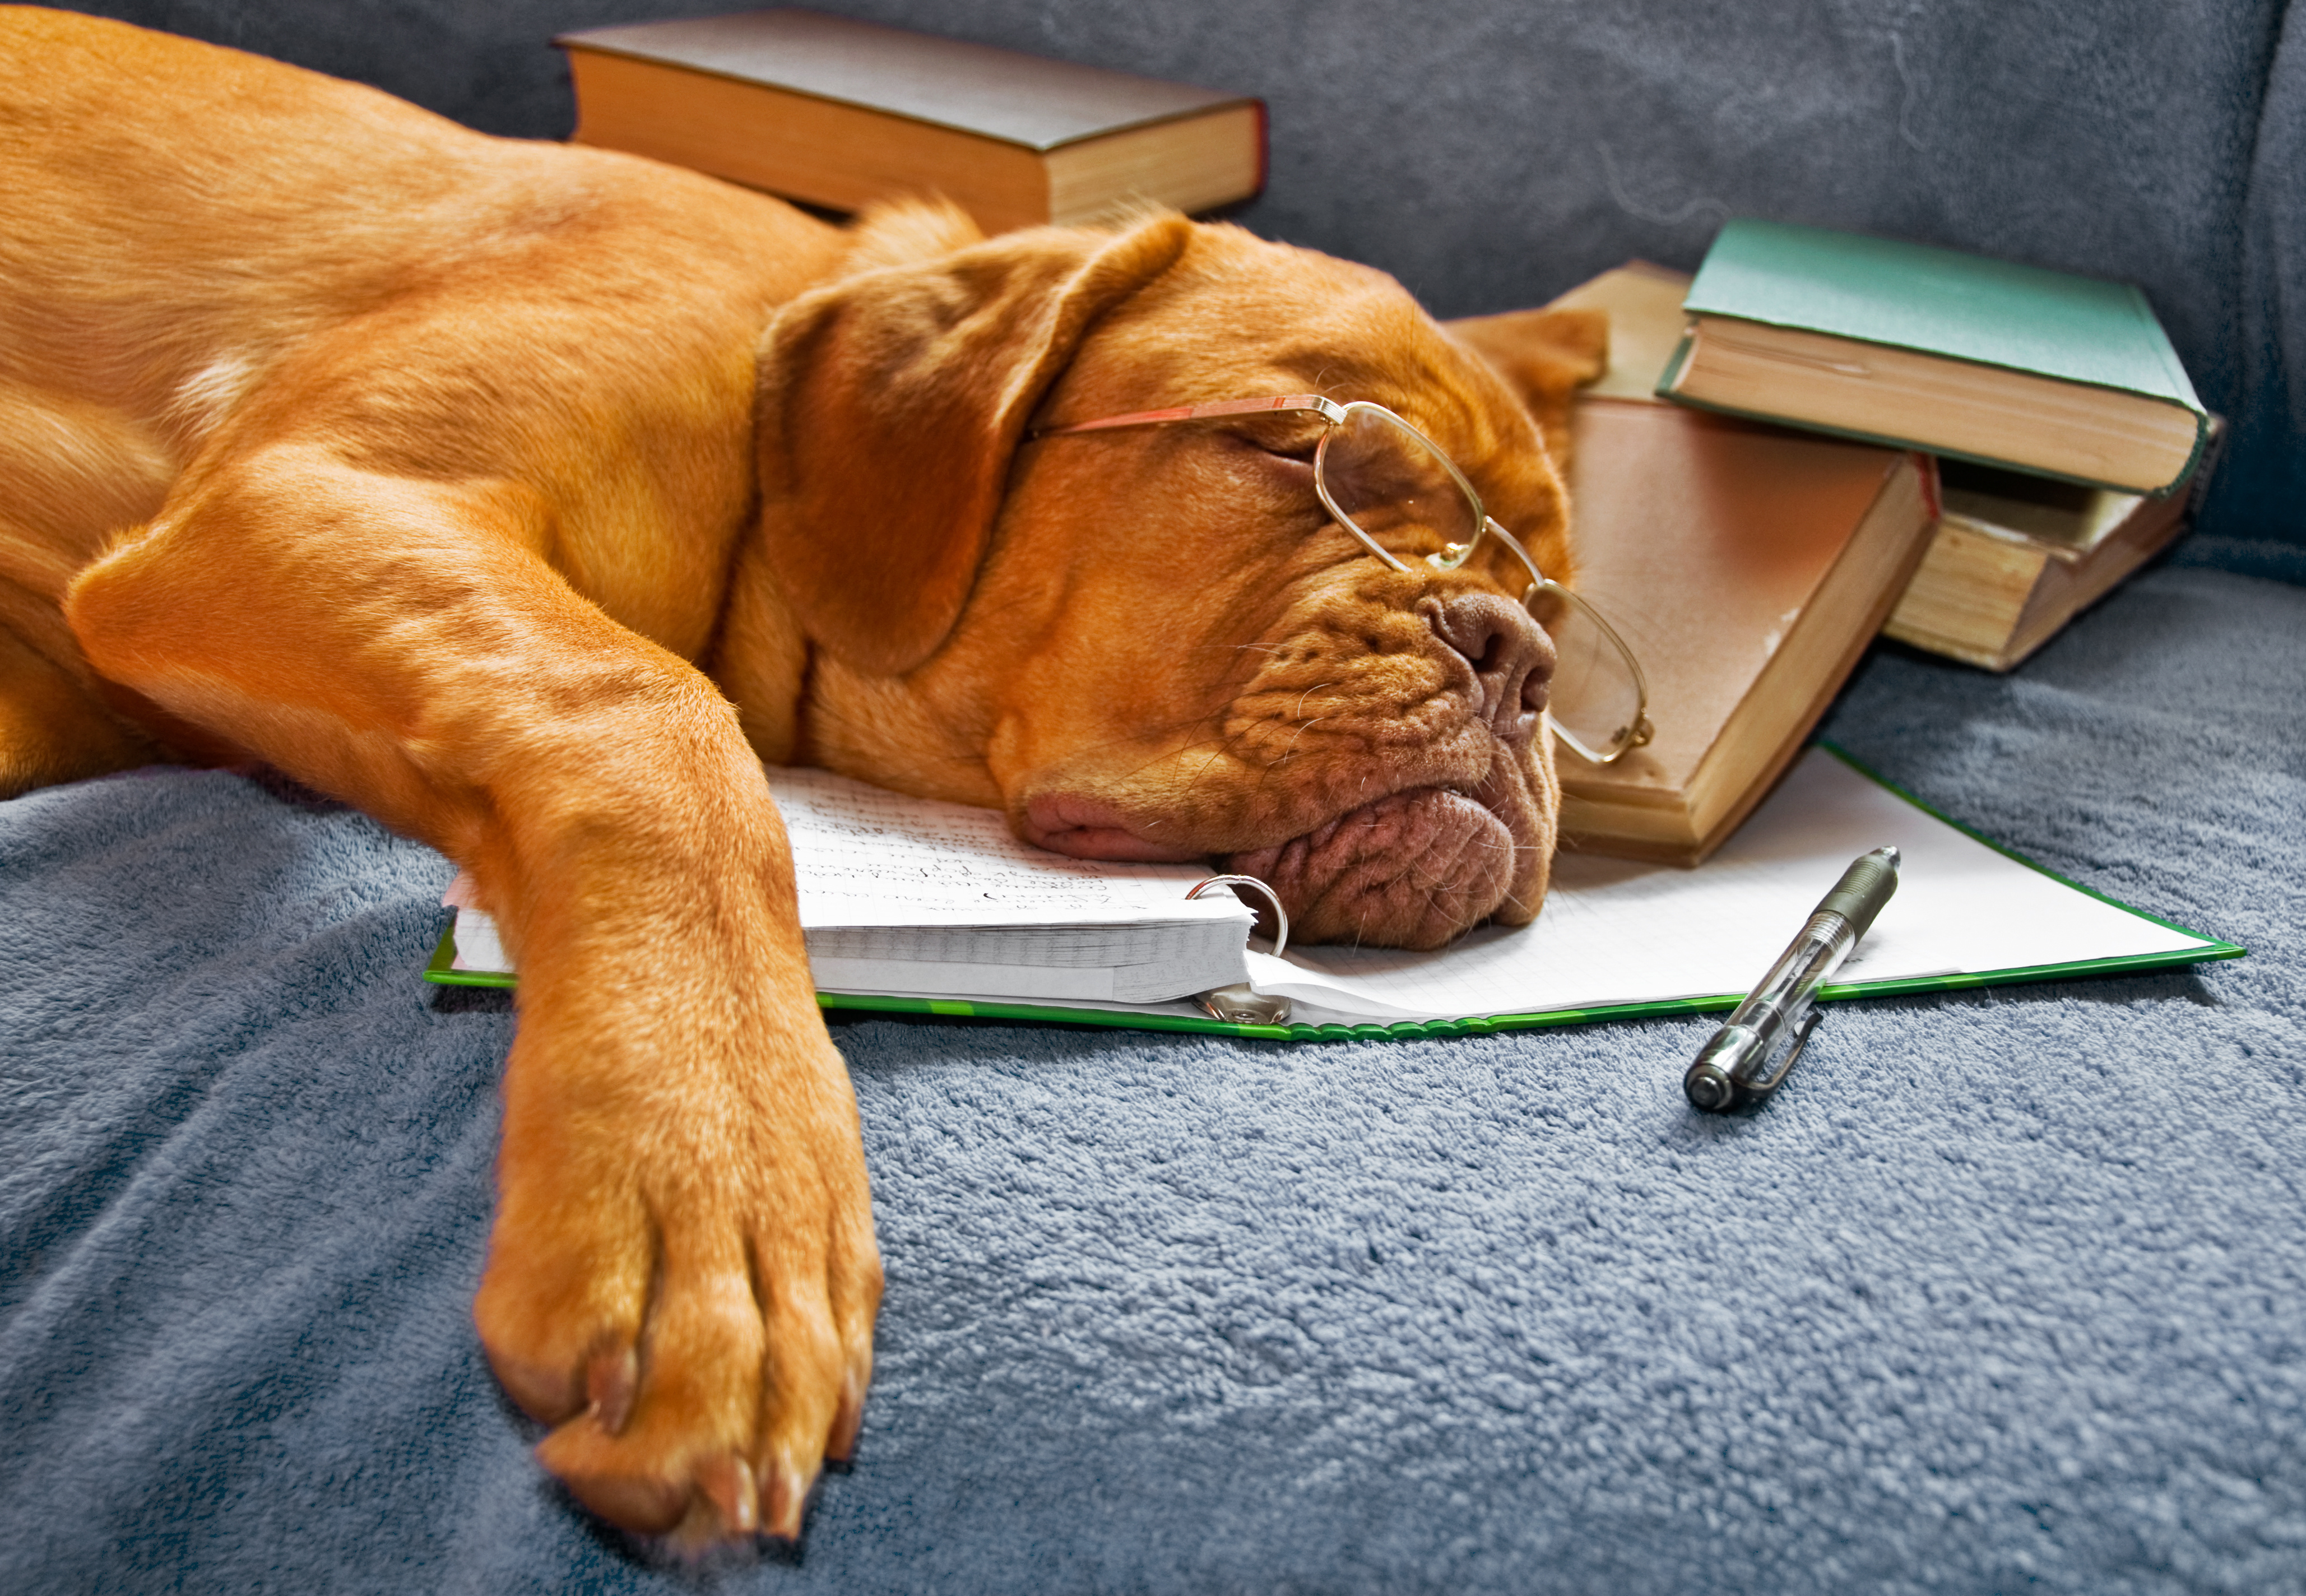 Dog Sleeping in her Notebook after Studying